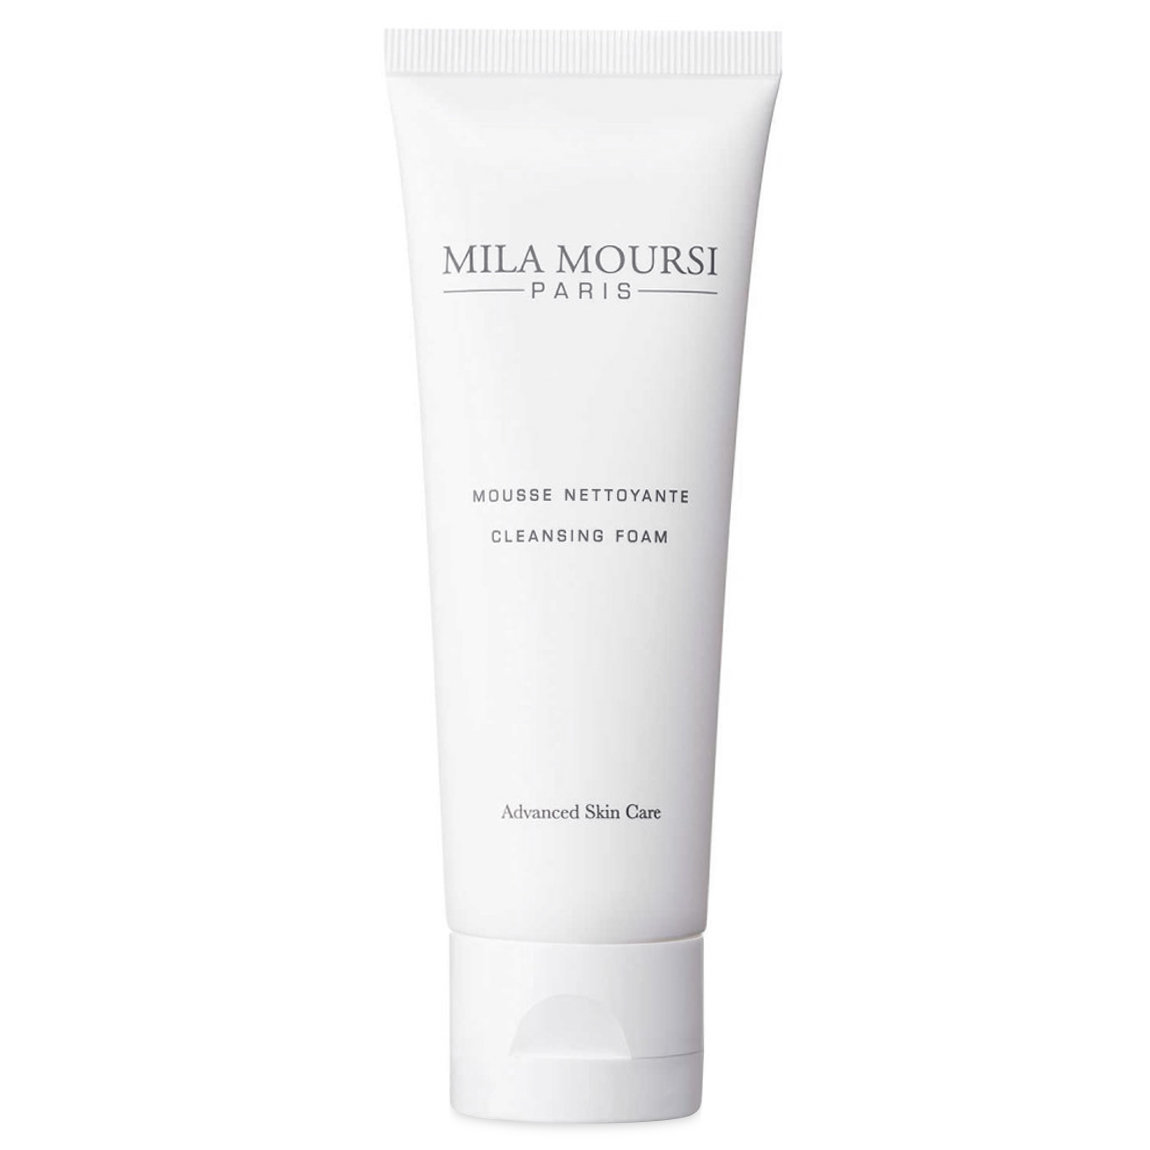 Mila Moursi Cleansing Foam alternative view 1 - product swatch.